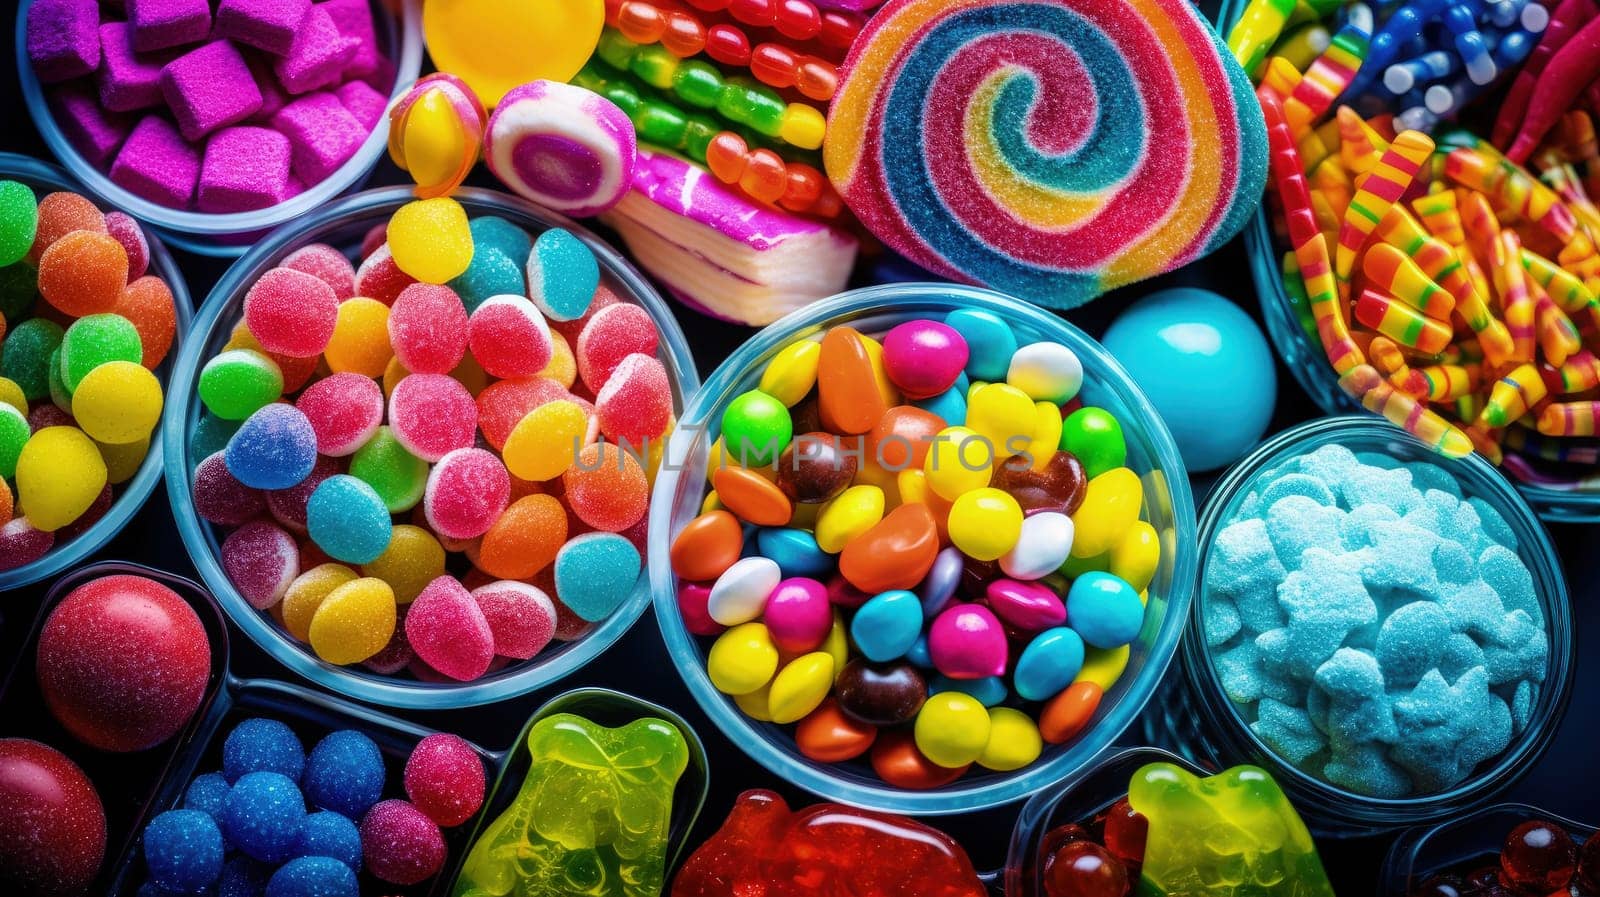 An assortment of candies, with pop art colors intensifying the vibrancy of a sweets by Kadula